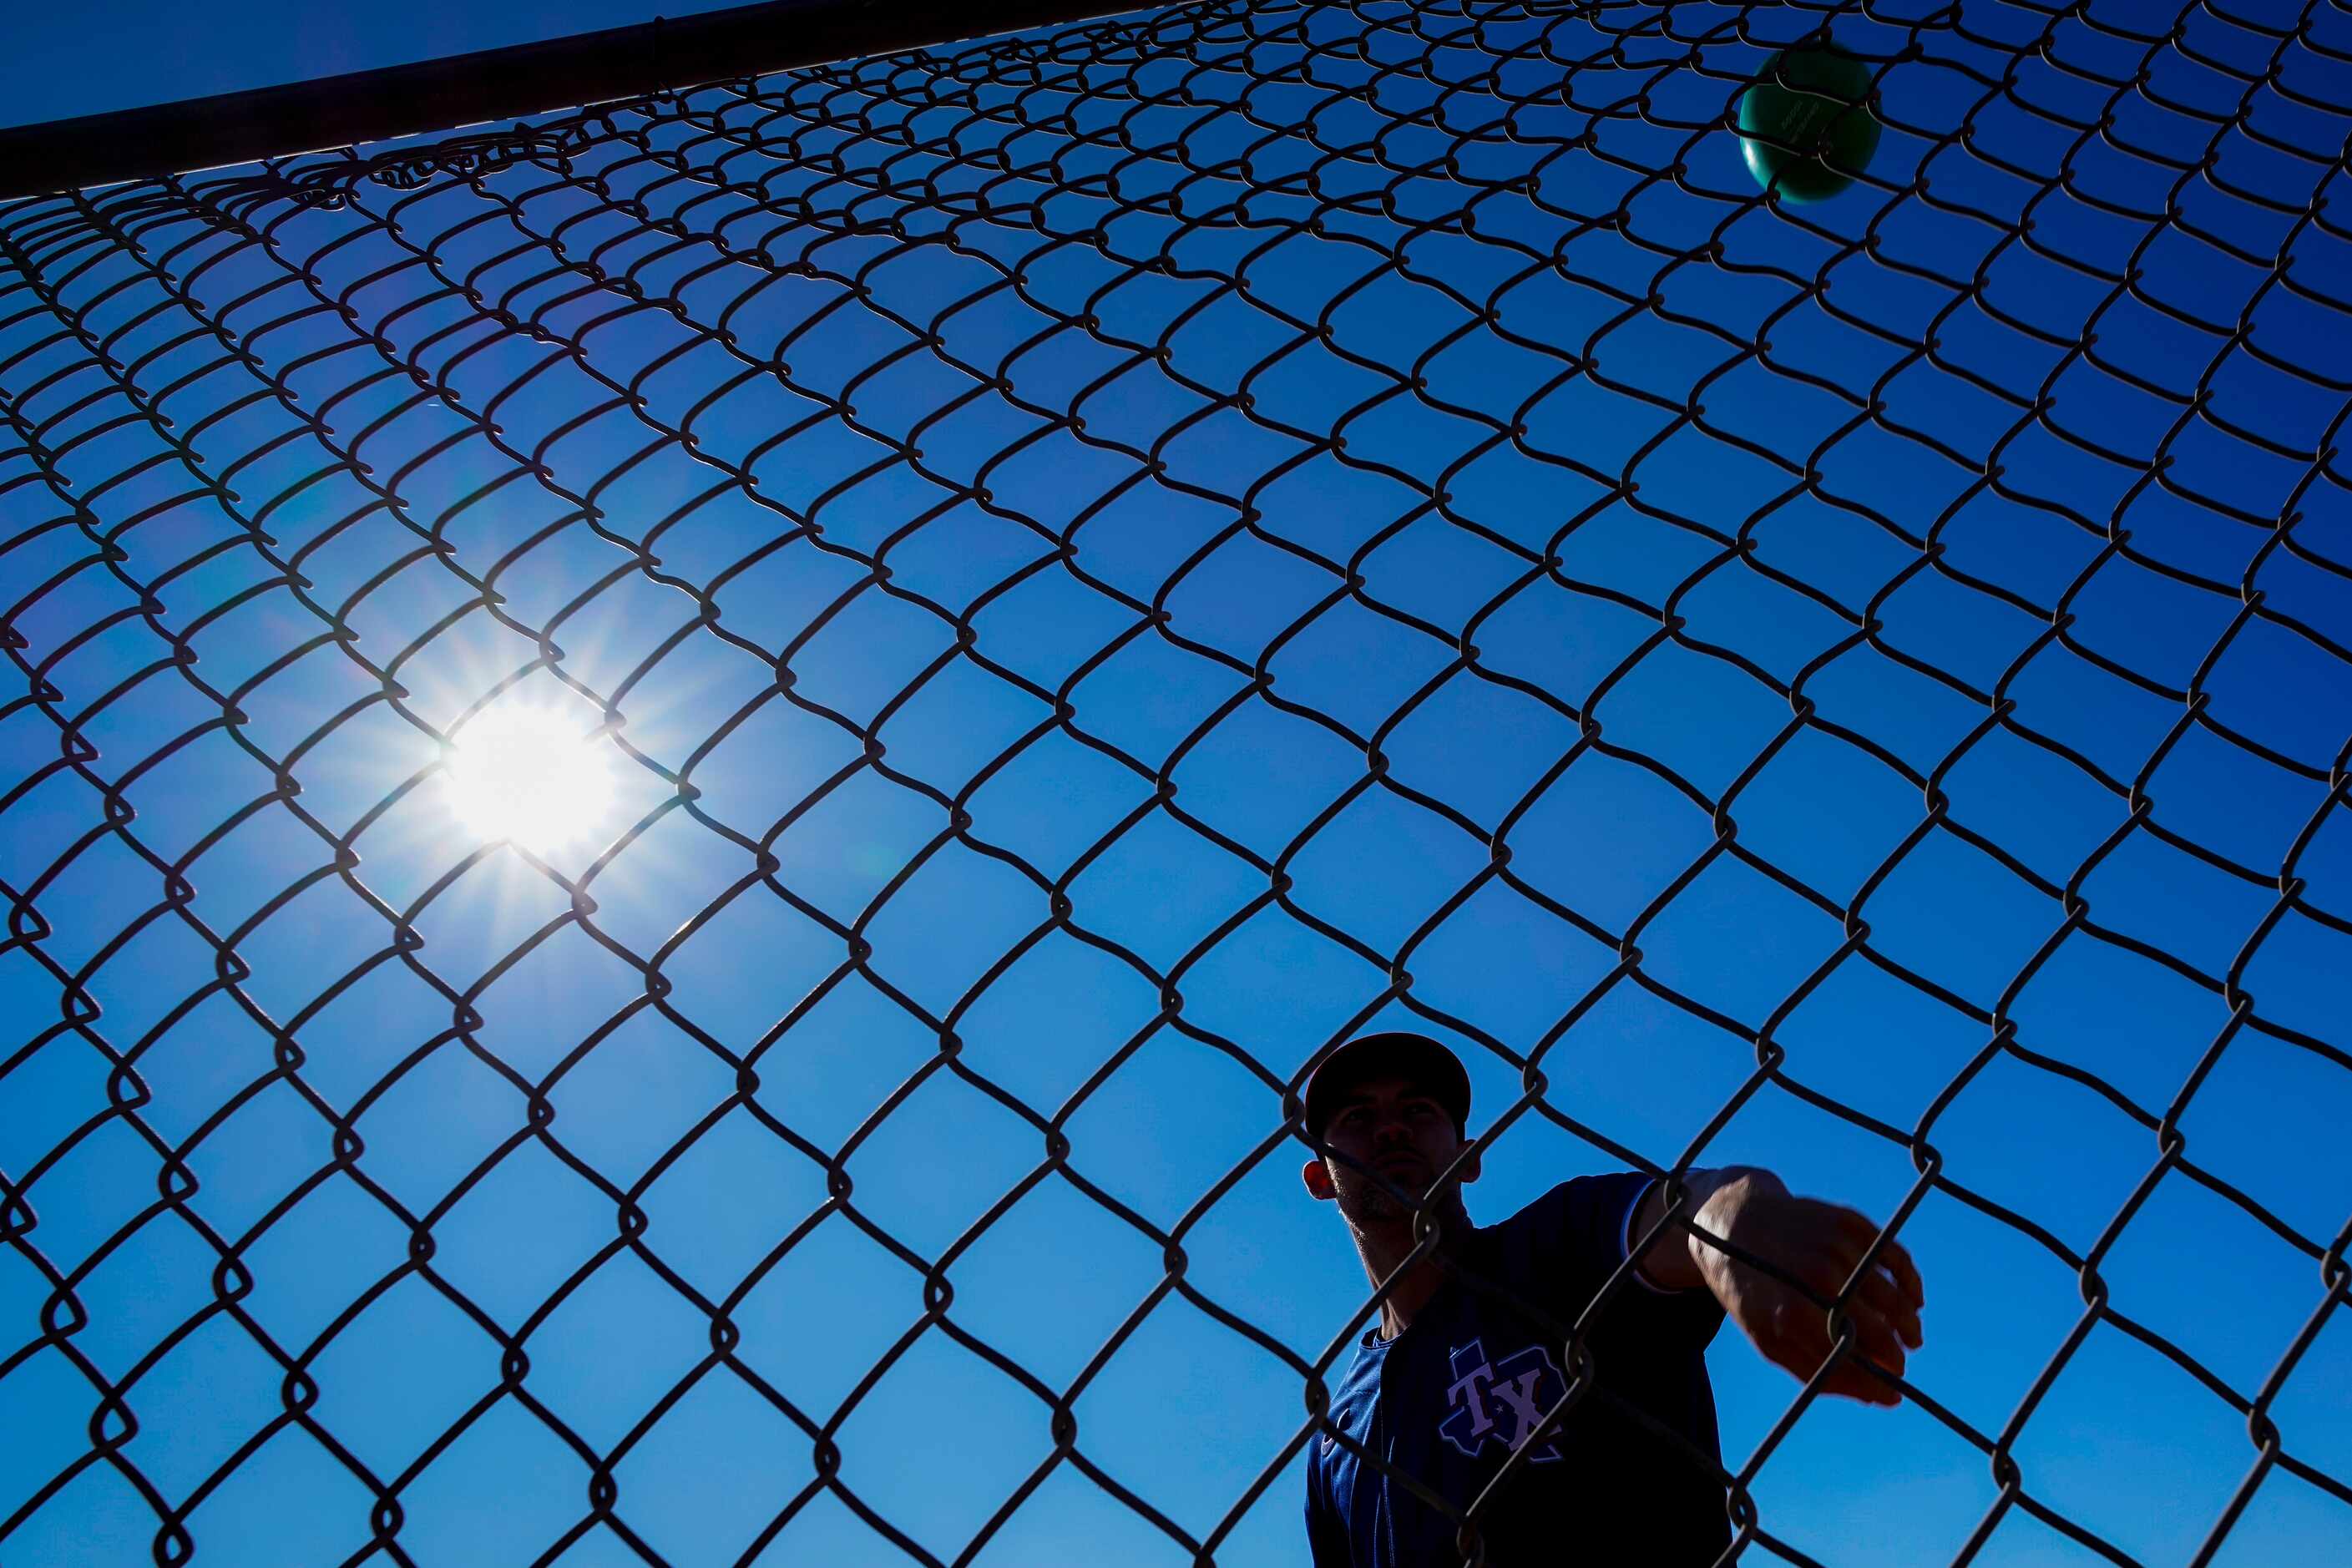 Texas Rangers pitcher Mike Minor tosses a ball into a fence during the first spring training...